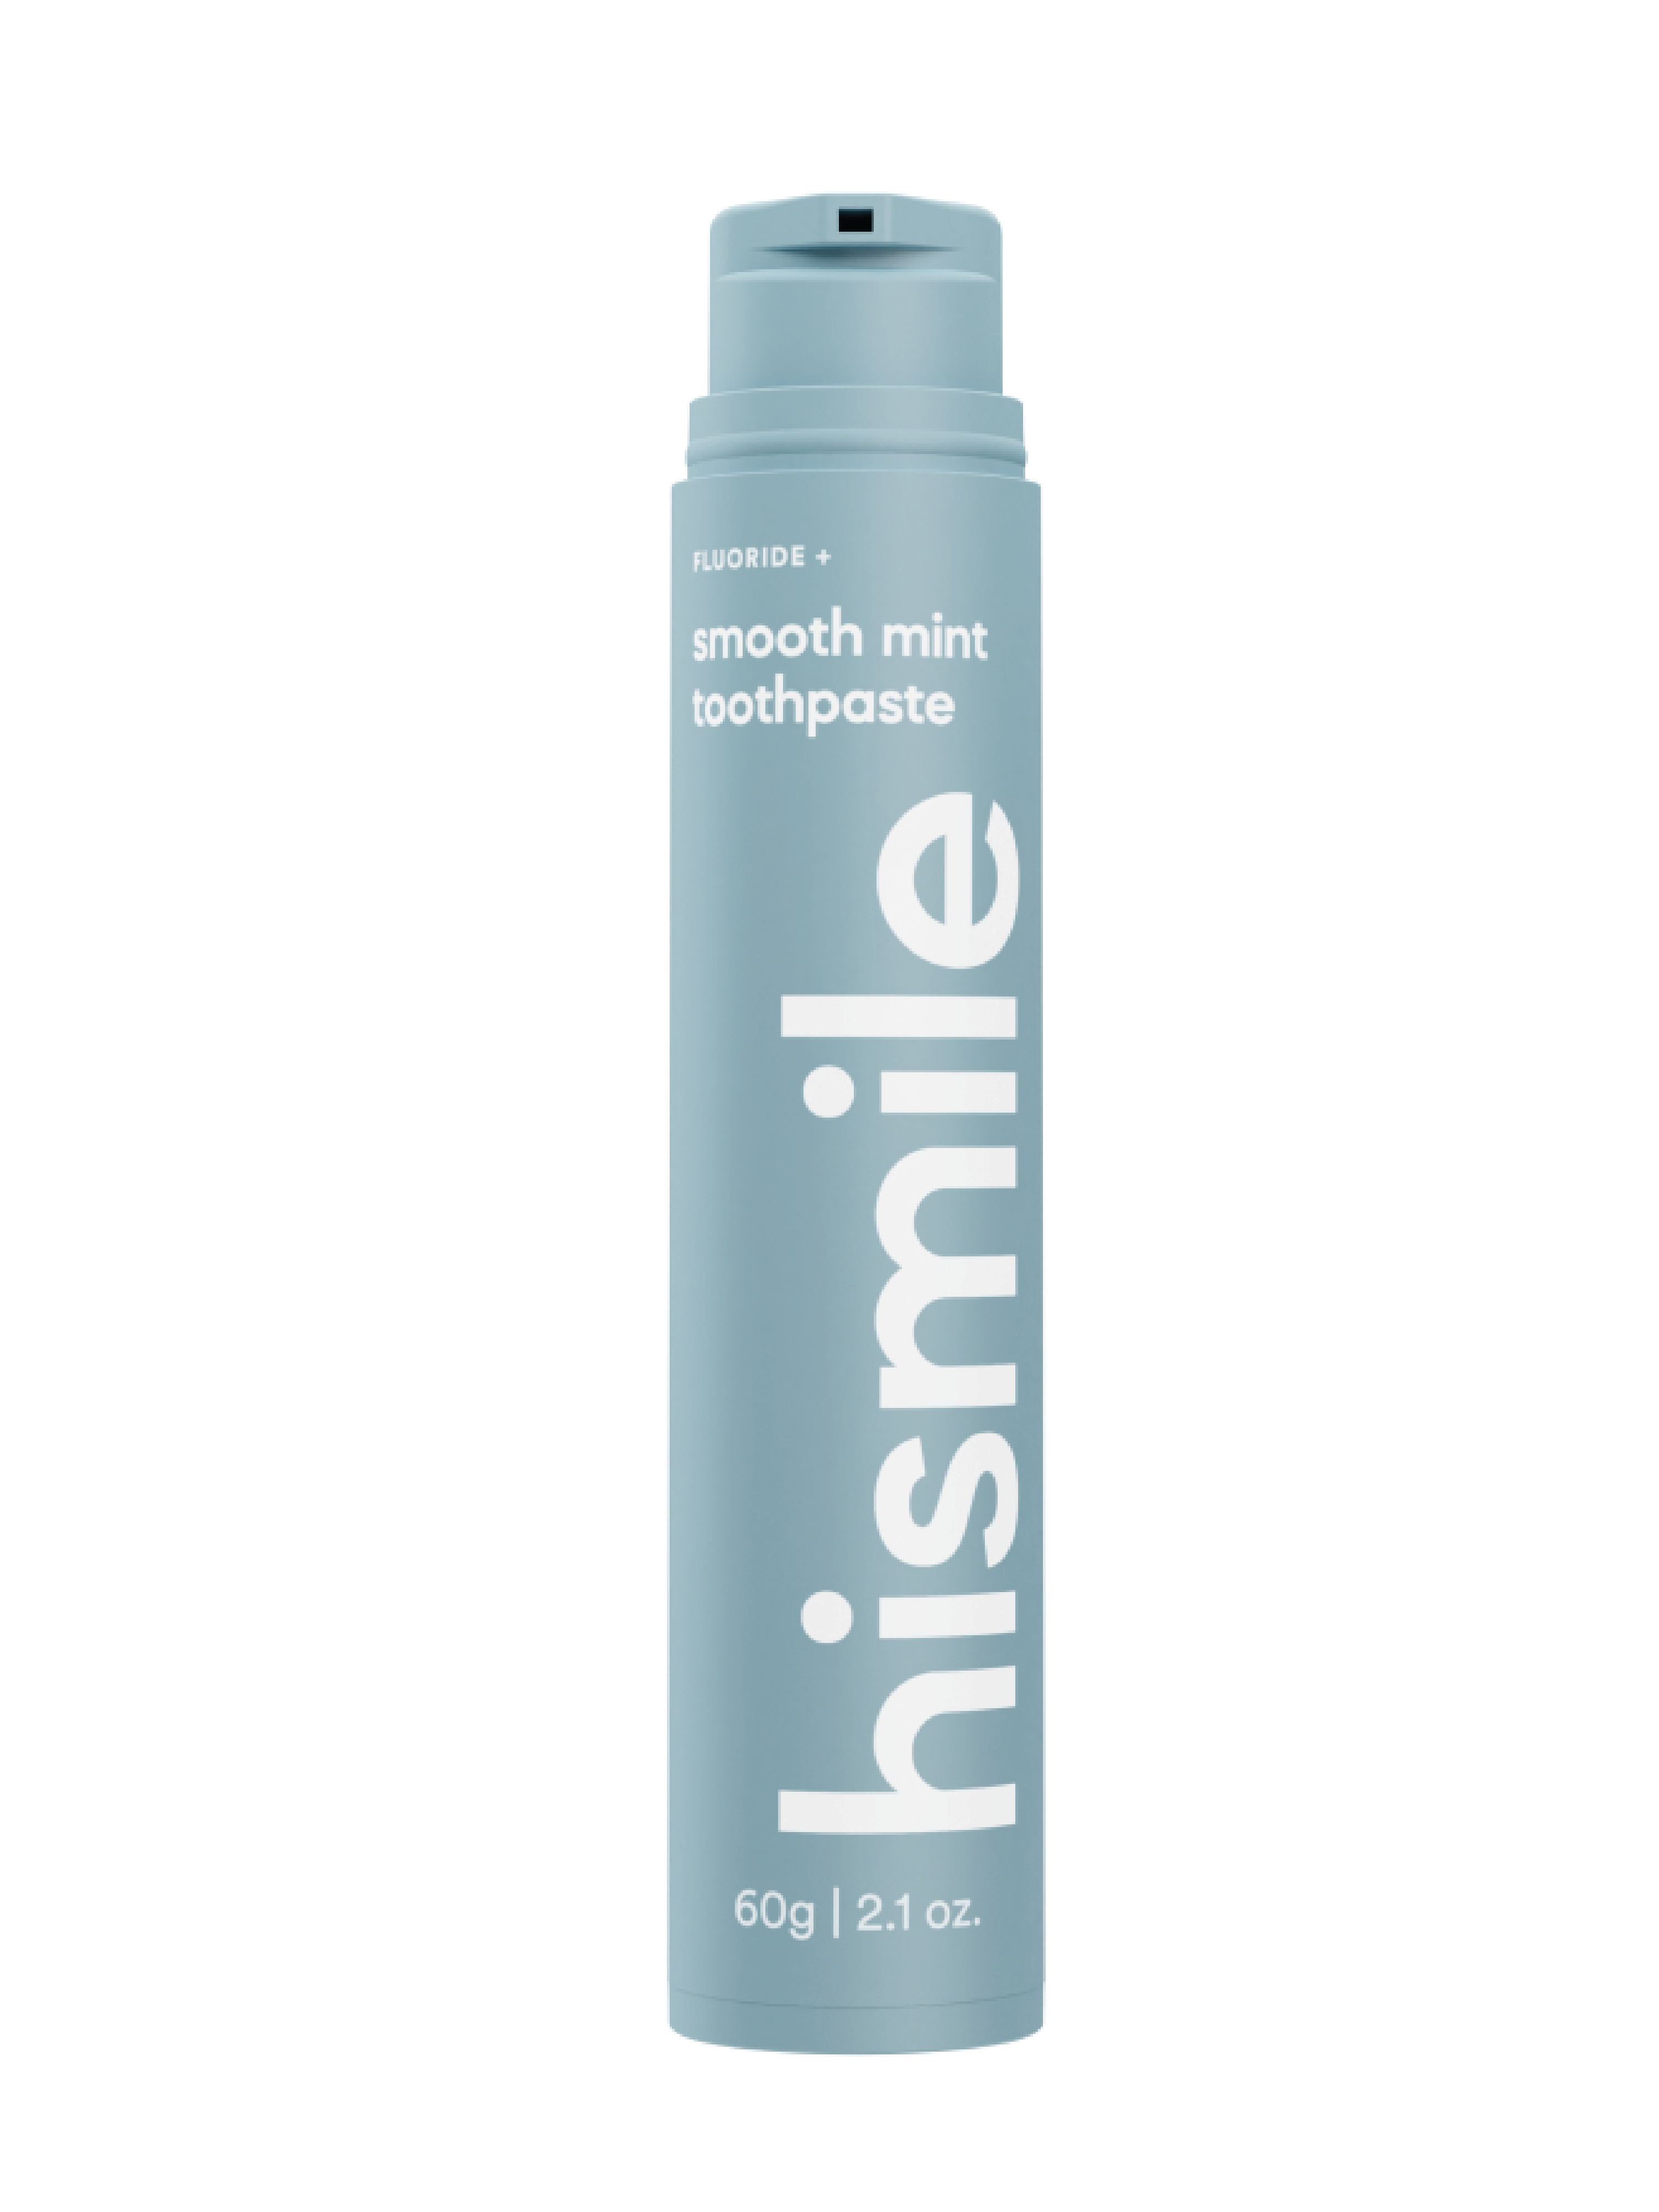 Hismile Smooth Mint Toothpaste, 60 g